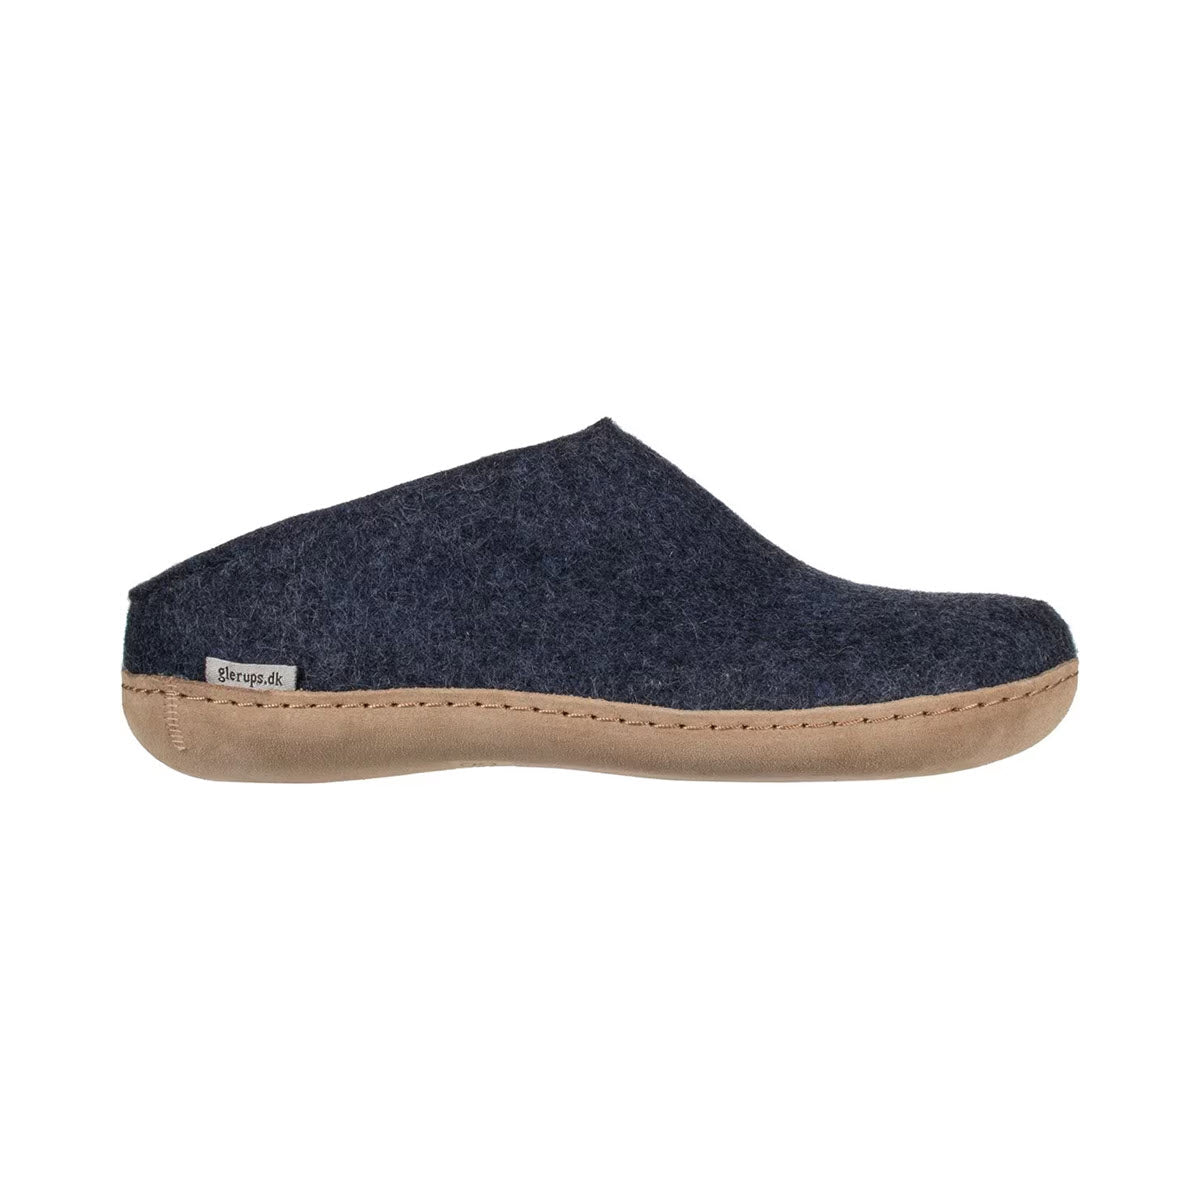 Side view of a navy blue felt Glerups Slip-On Slipper with a tan rubber sole and a small logo tag on the side.